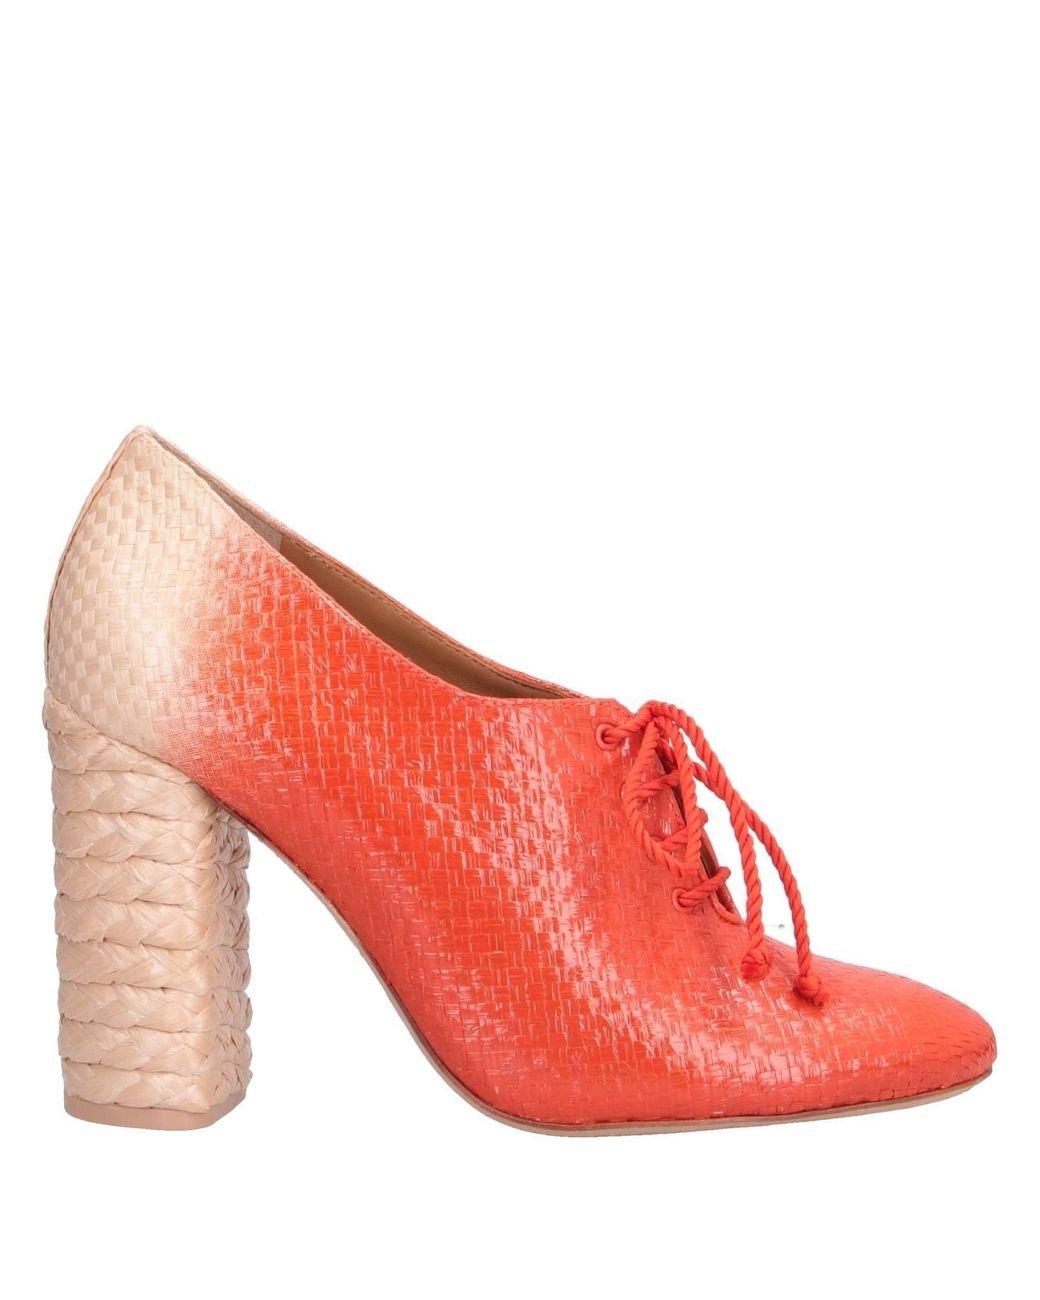 Tory Burch Lace-up Shoes in Orange | Lyst